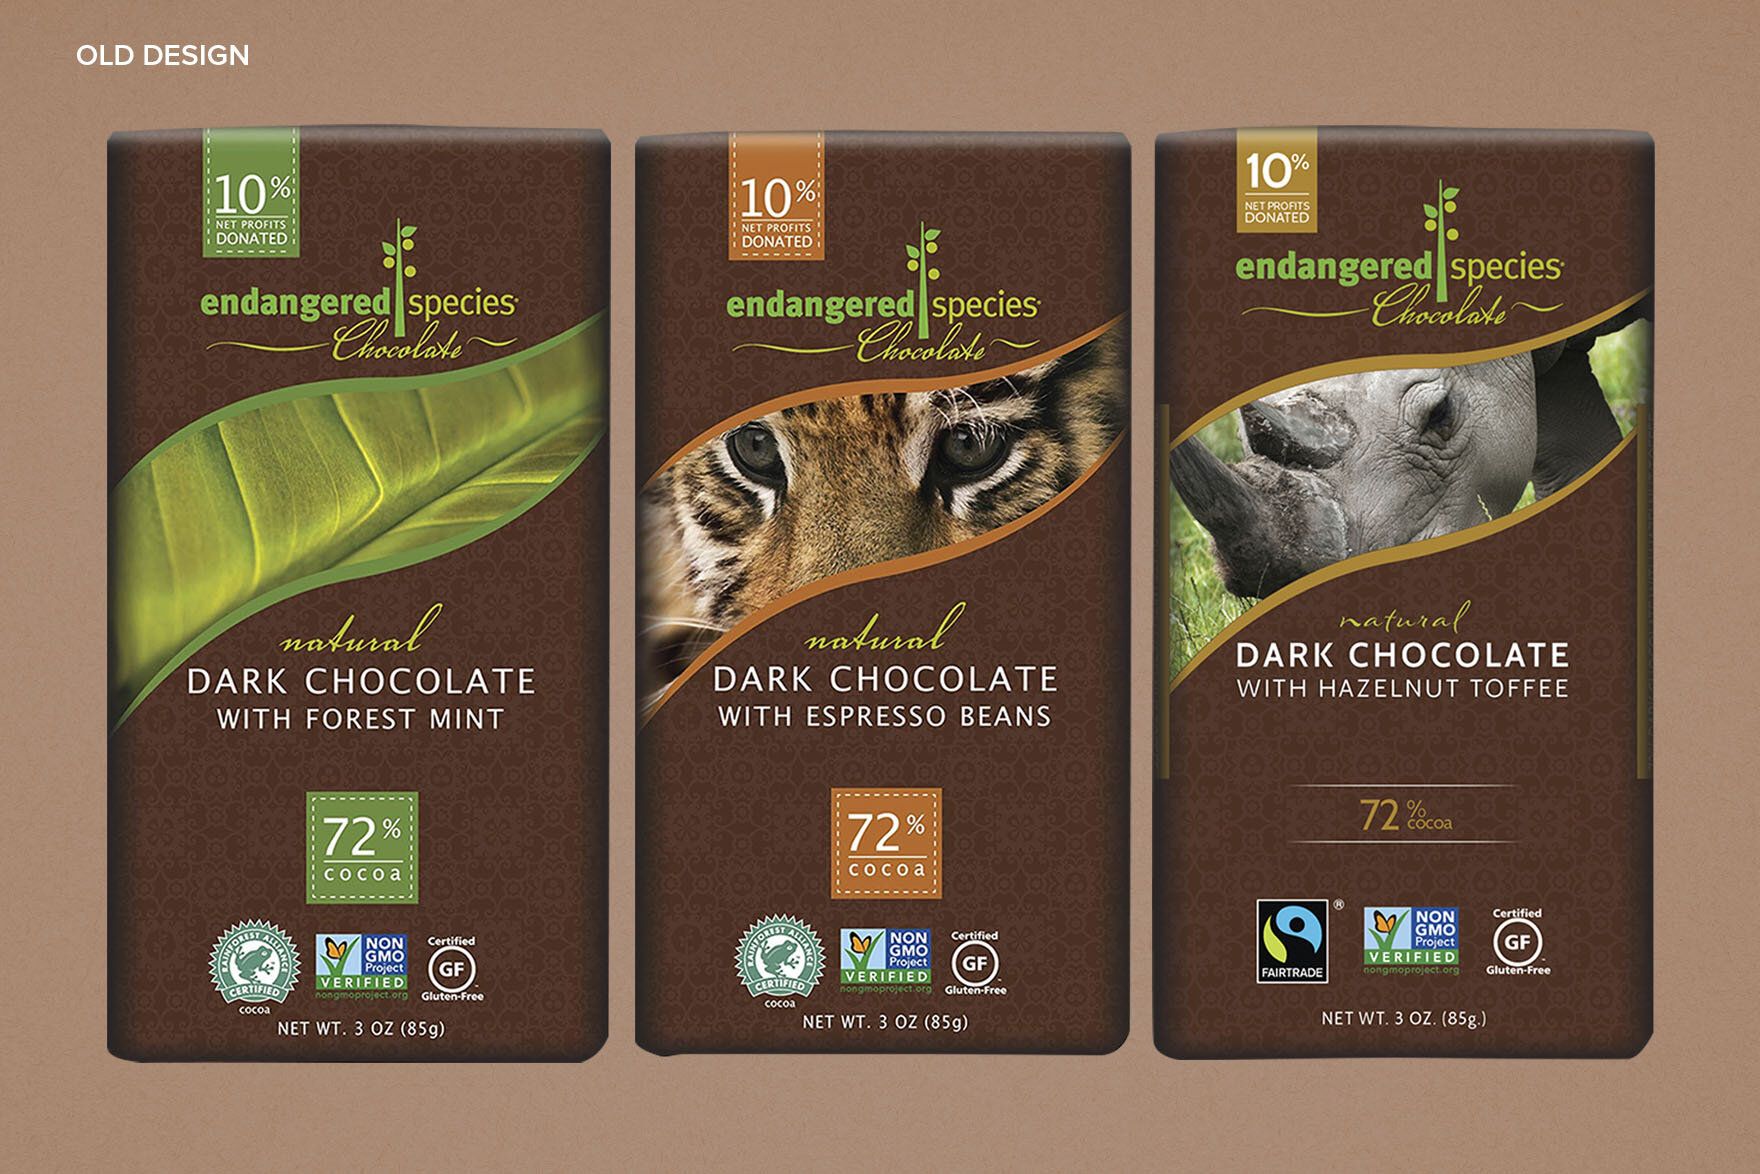 Endangered Species Chocolate's original packaging designs for the 3oz Rainforest, Tiger and Rhino dark chocolate bars